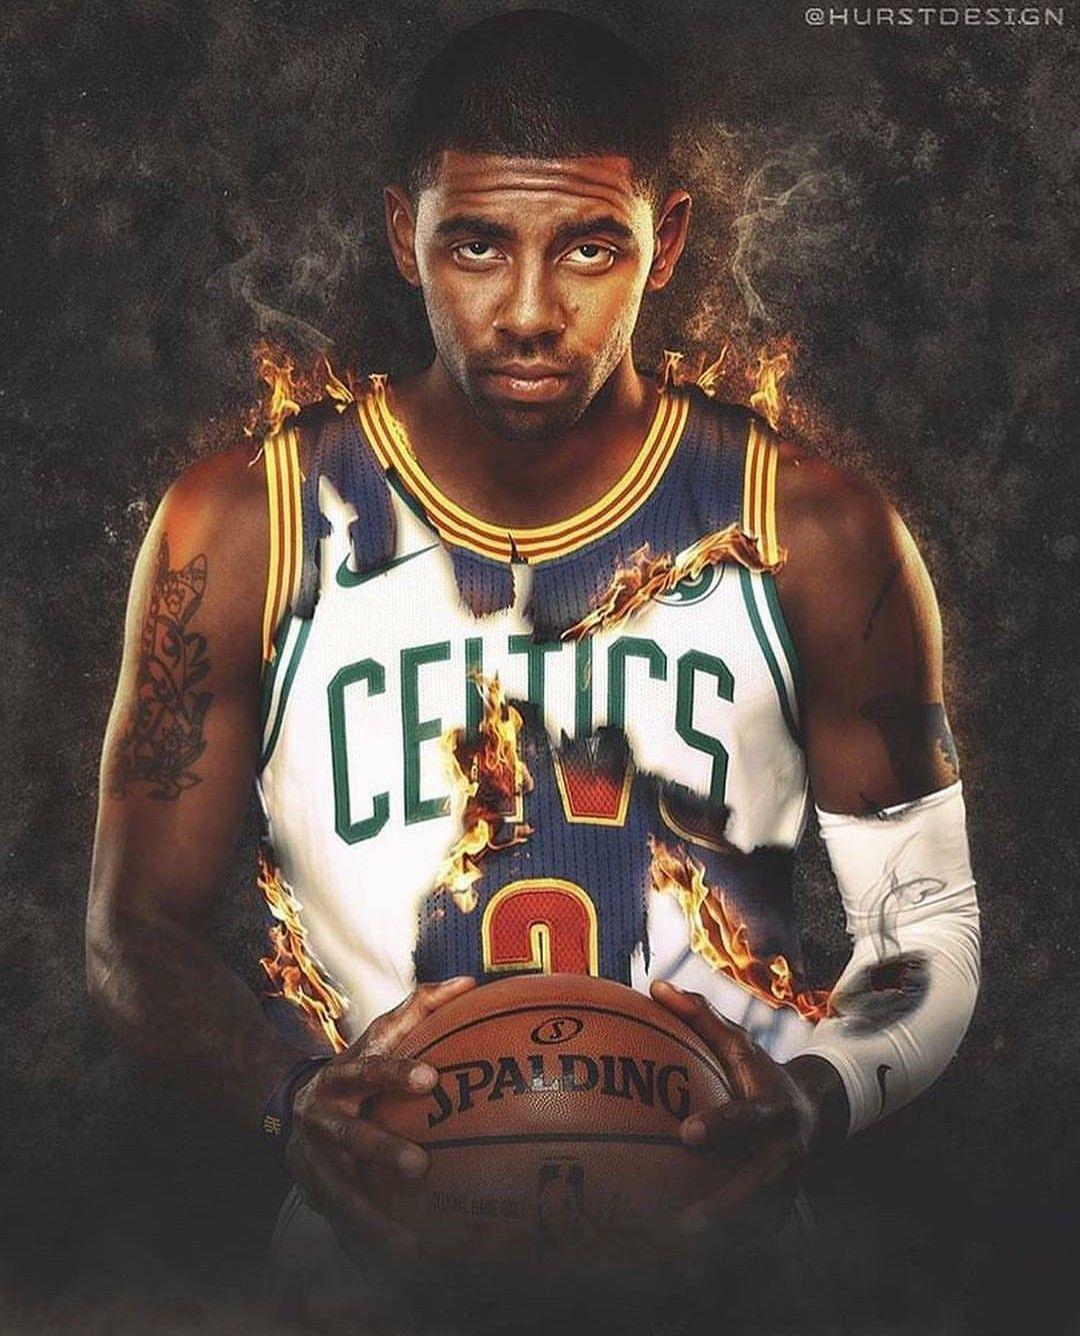 Kyrie Irving edit from Cavaliers to Celtics.well I don't like